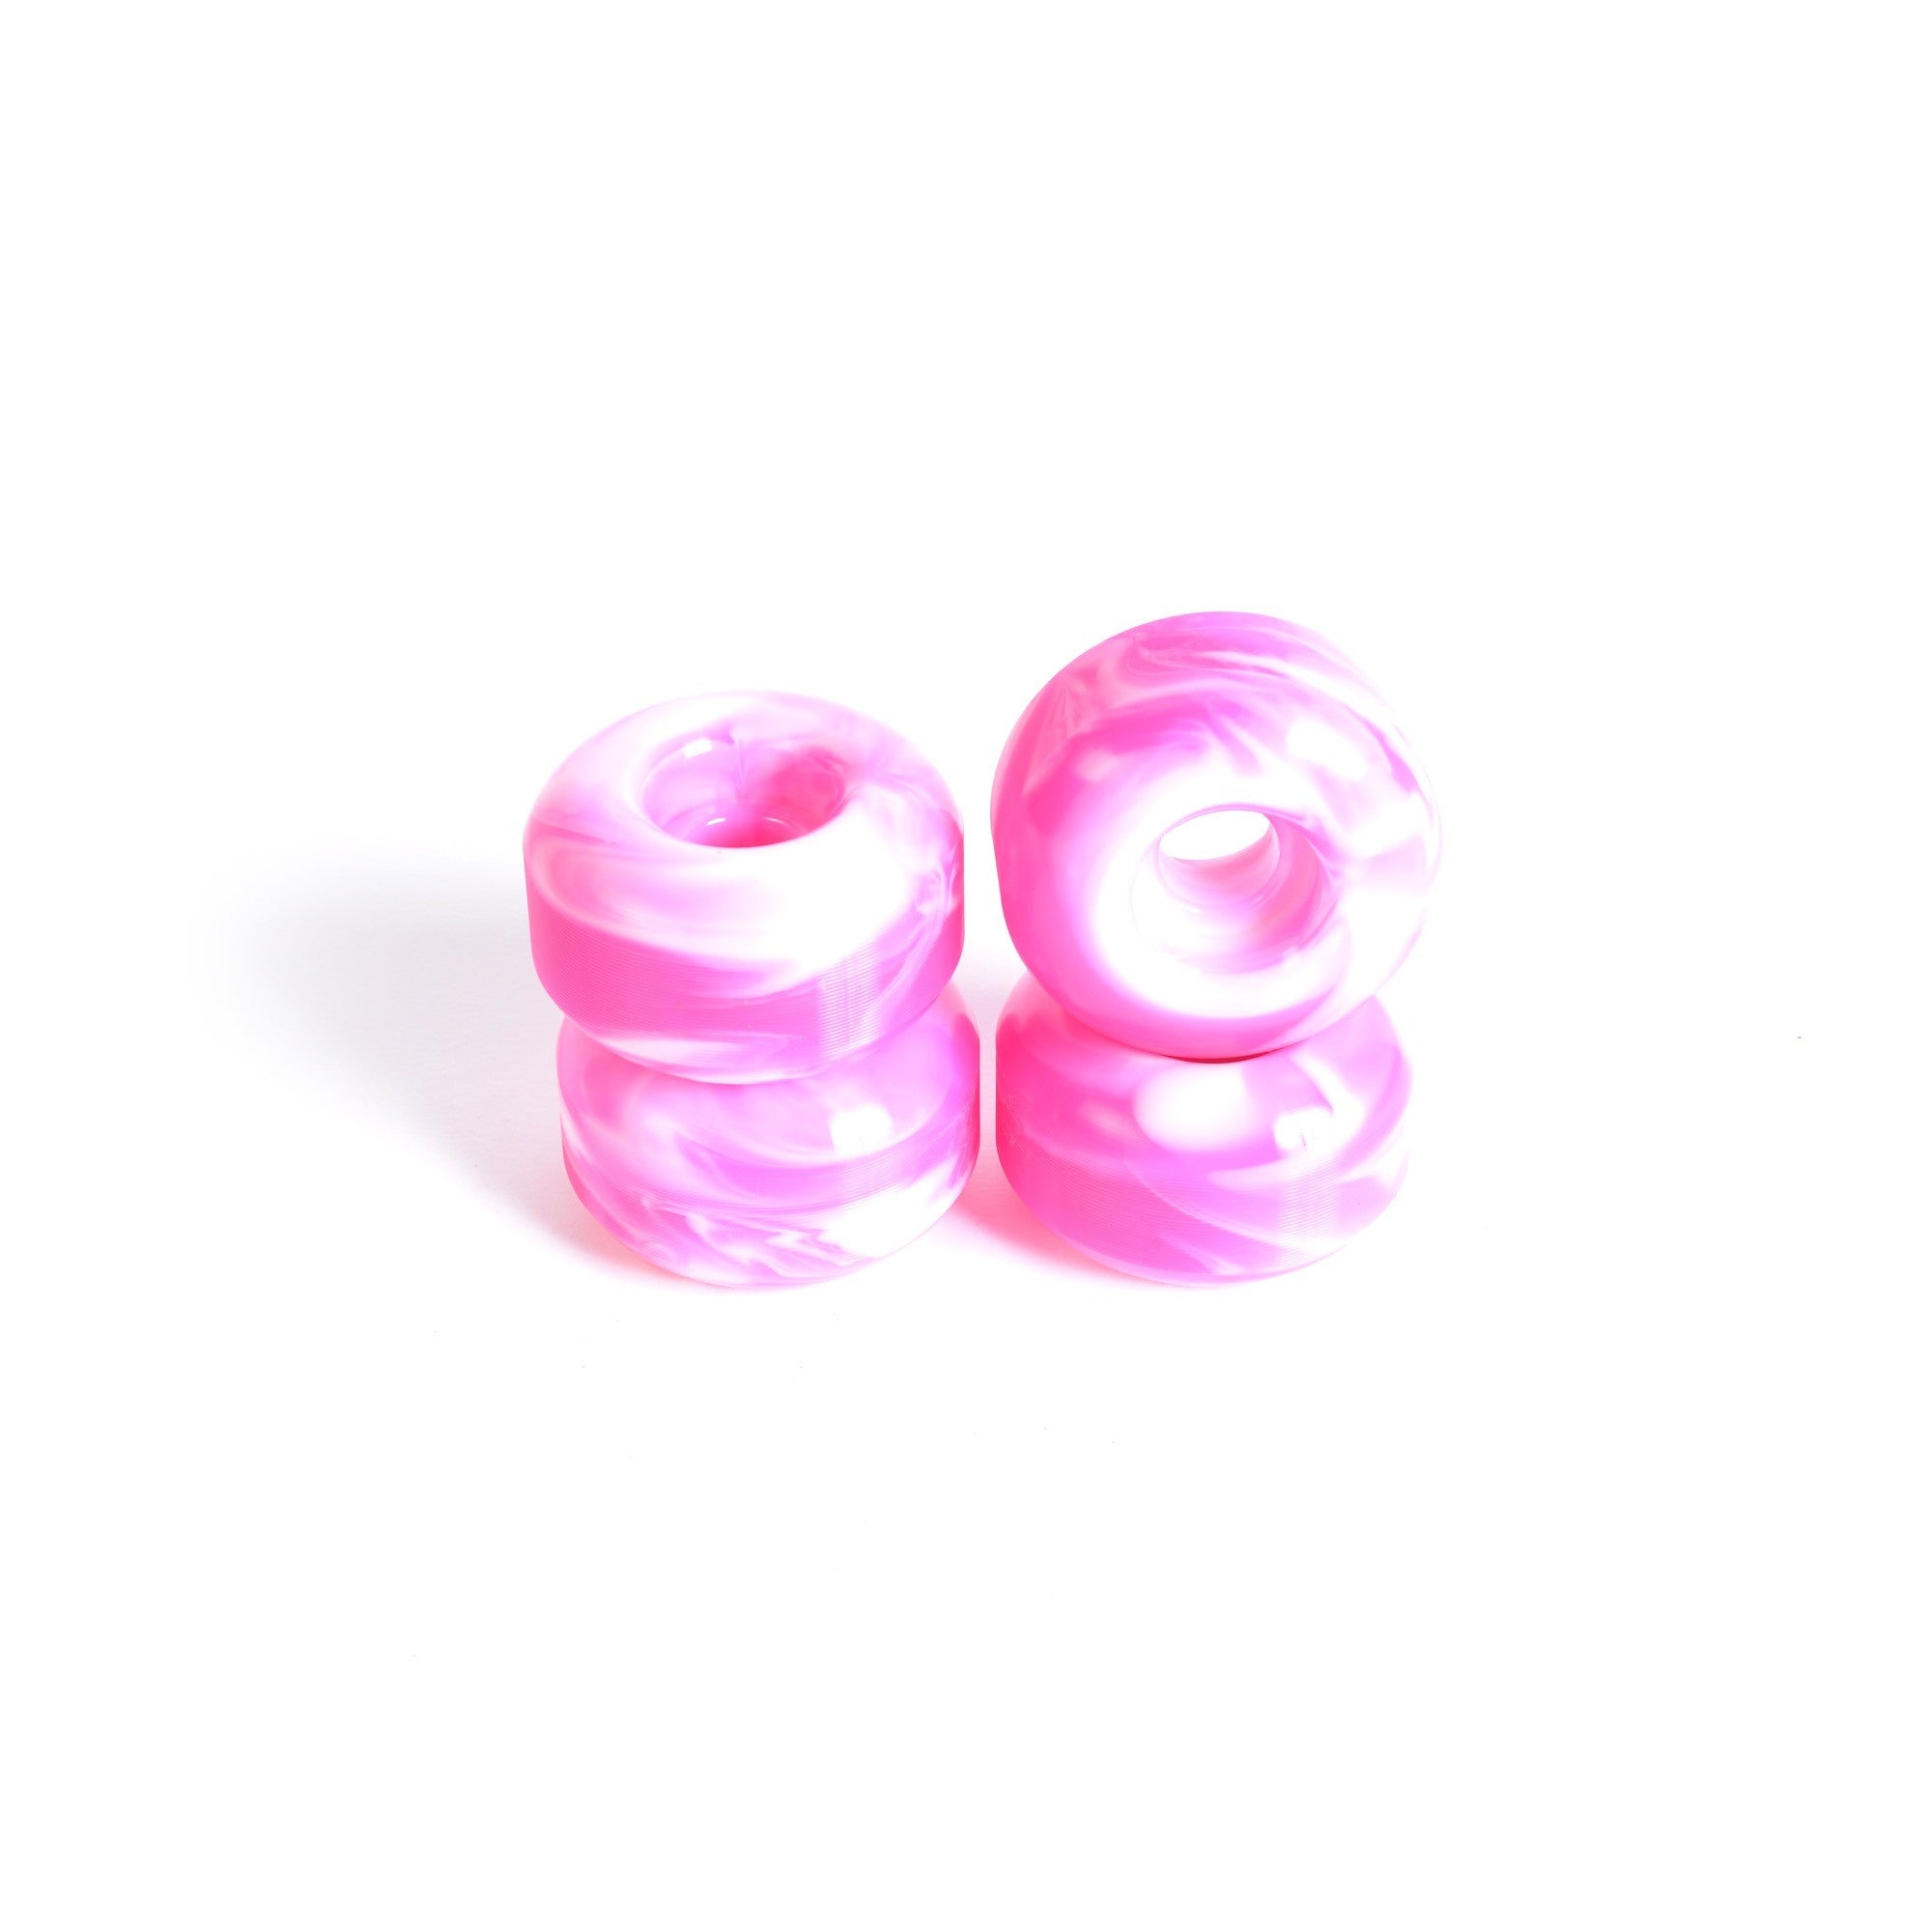 Roues skateboard - YOCAHER 52x30mm 99a - Swirl White/Pink